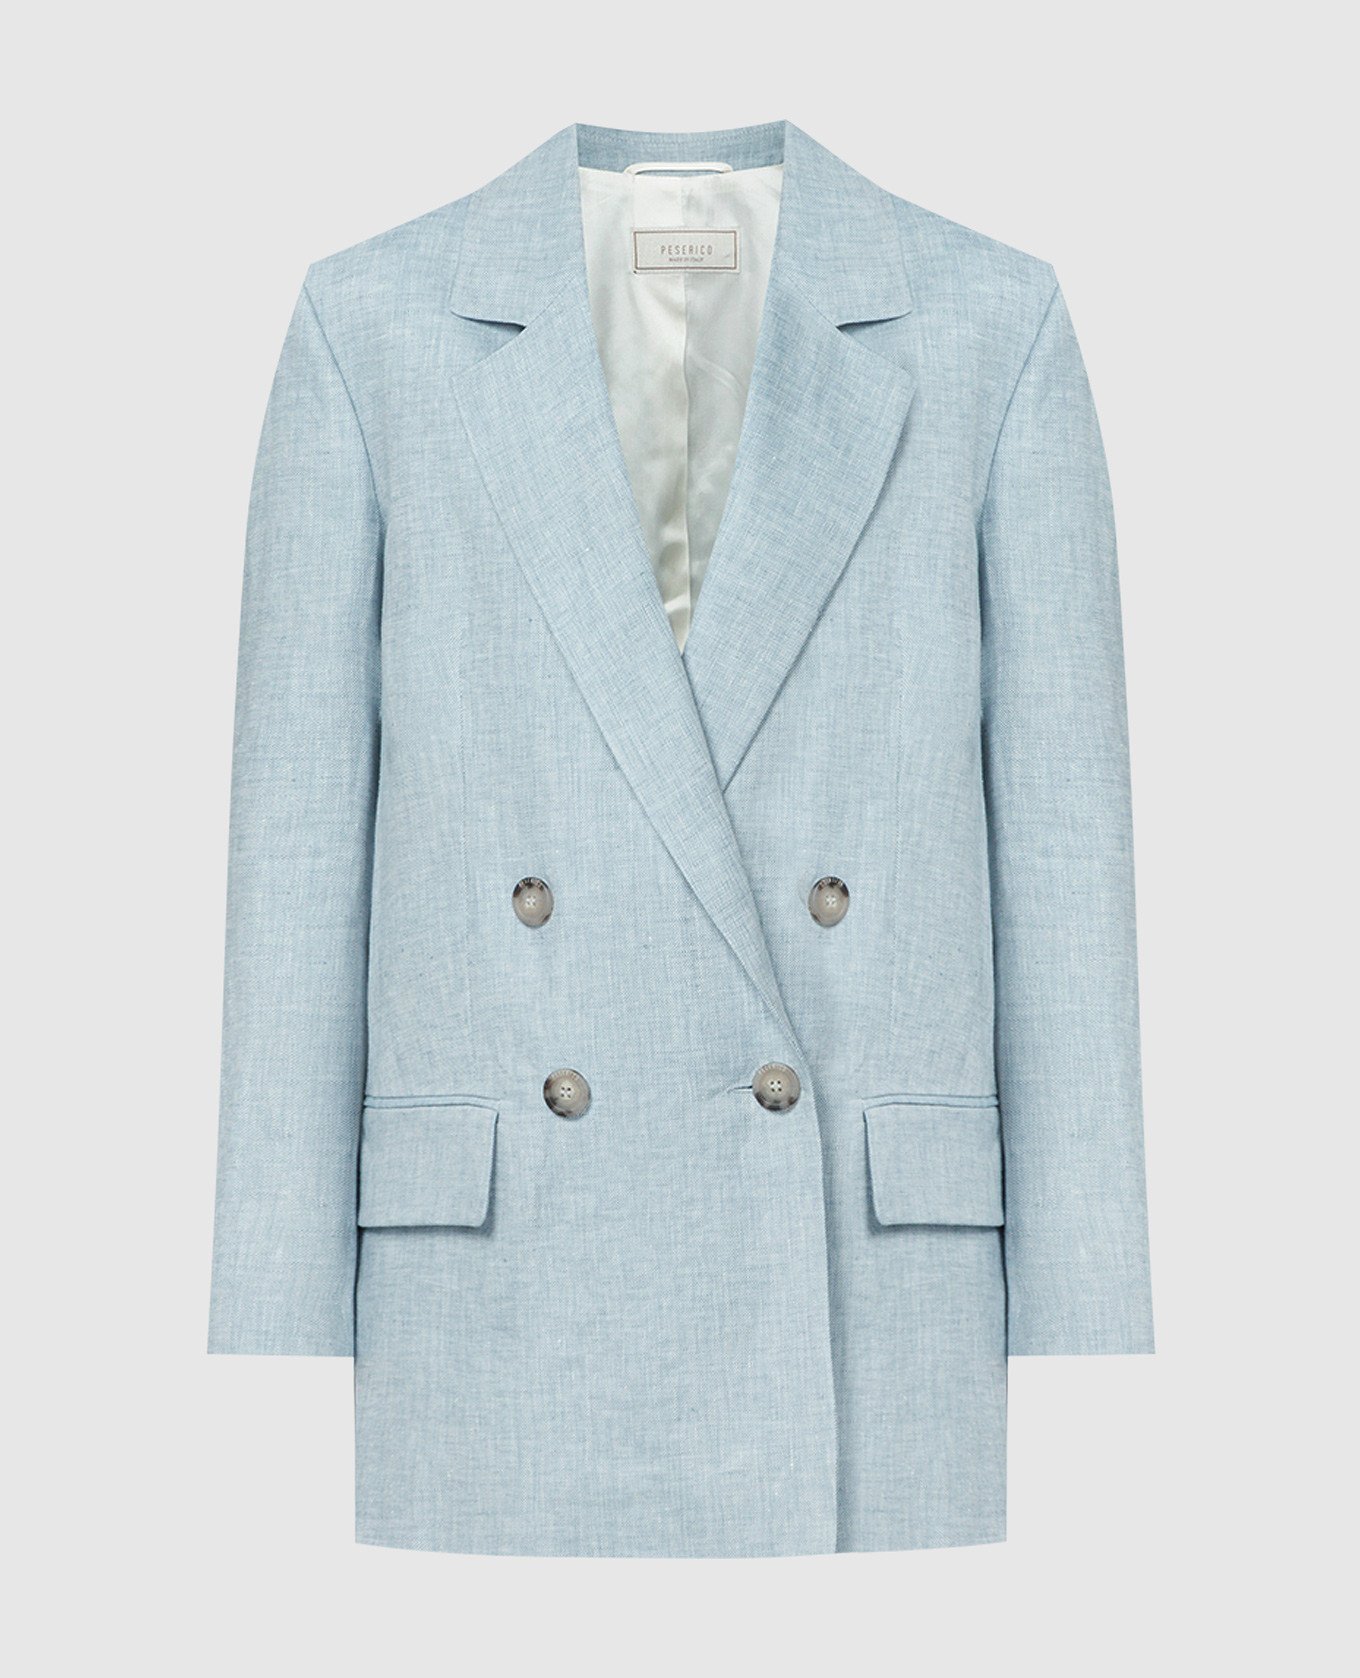 Blue double-breasted linen jacket